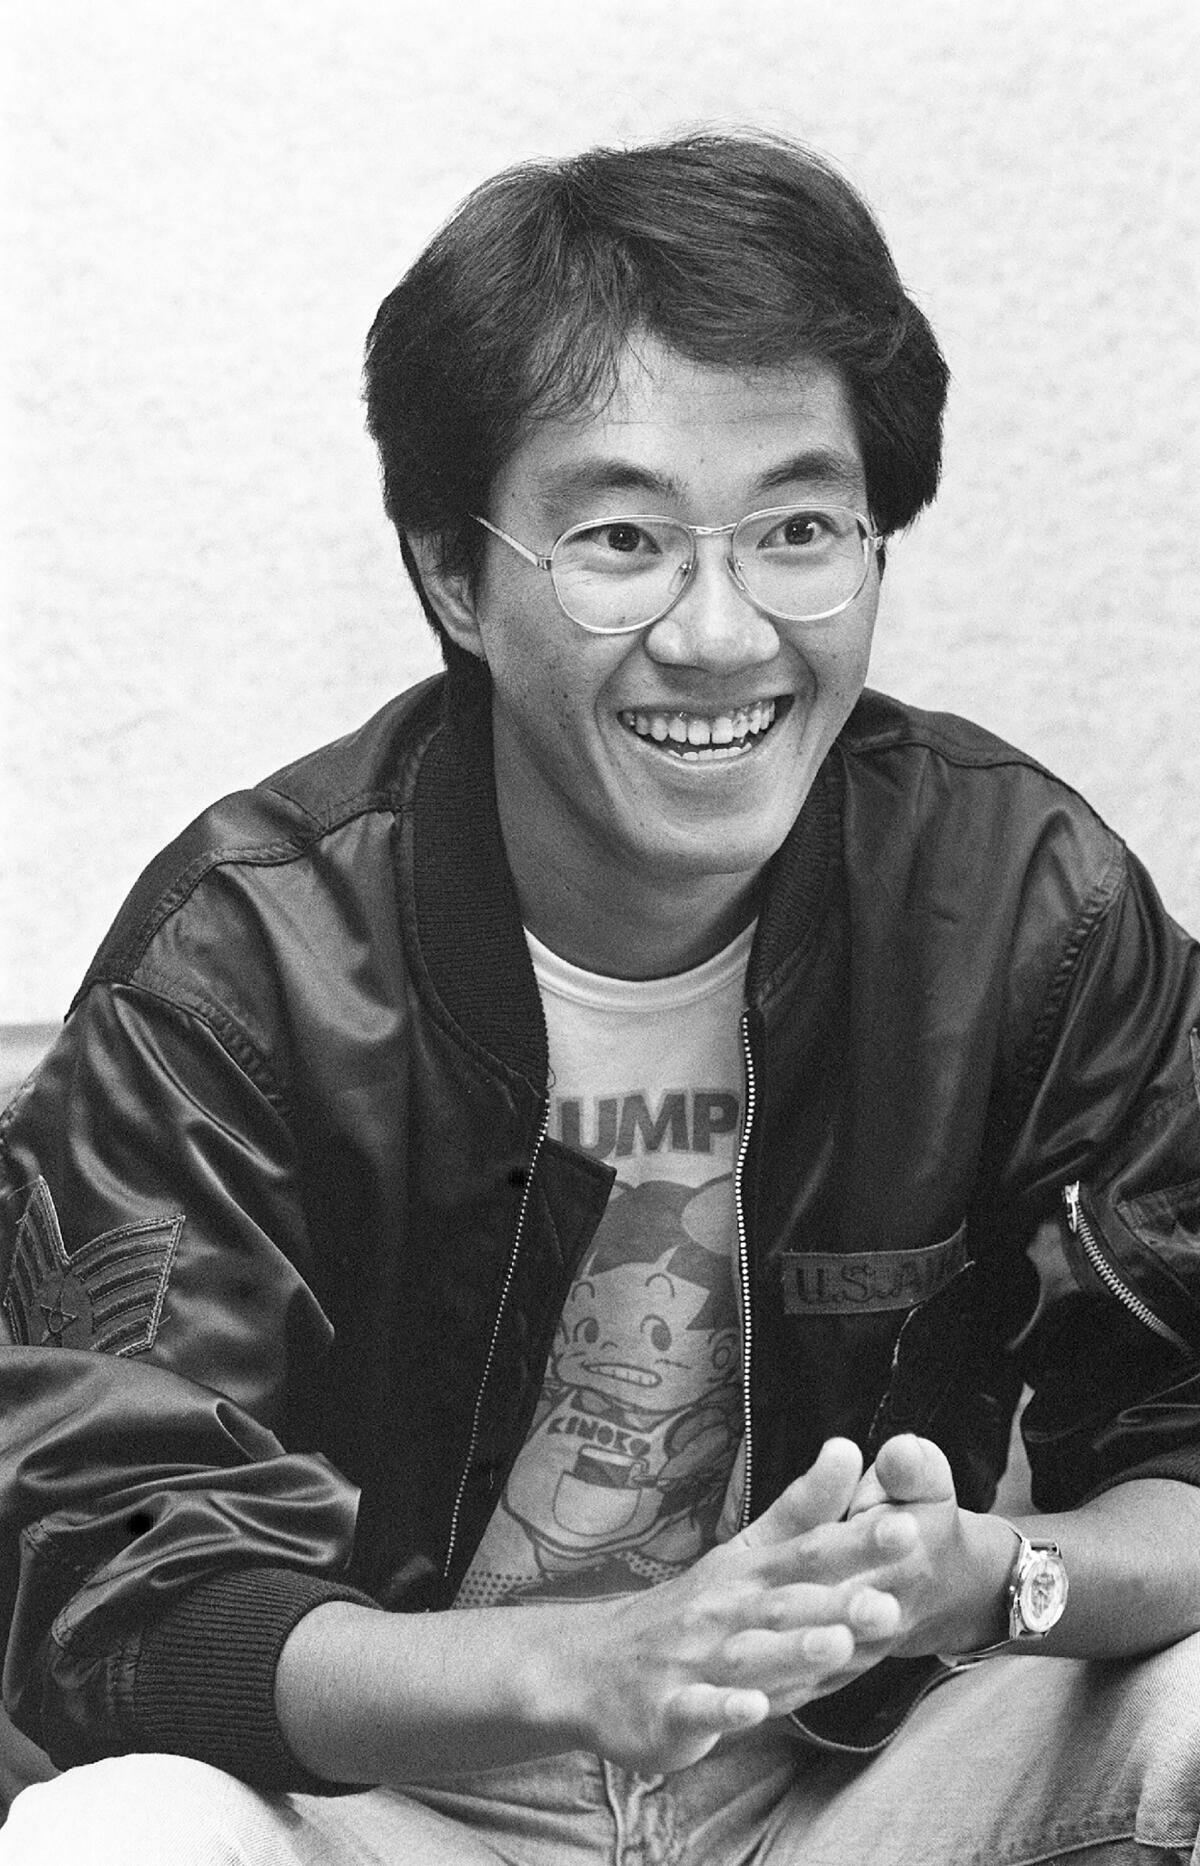 A smiling man in a black and white photo.